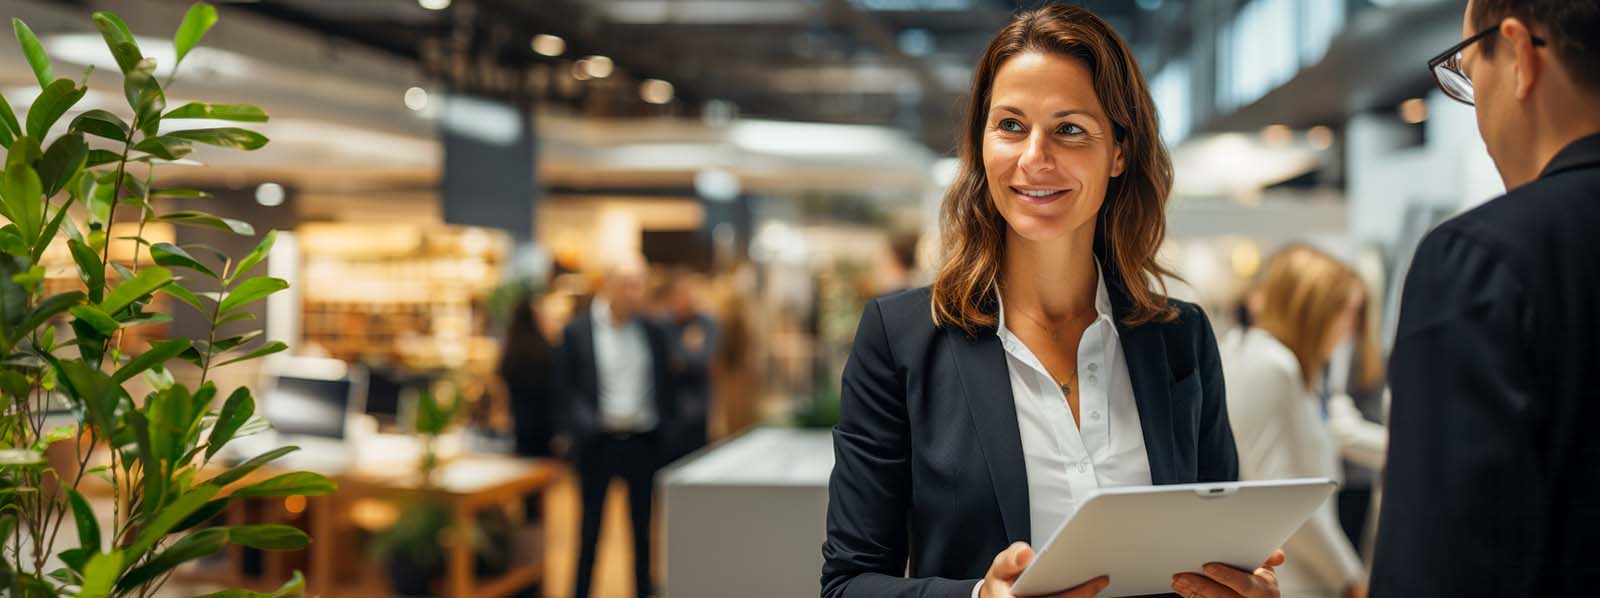 woman holding tablet and smiling, talking to man at trade show